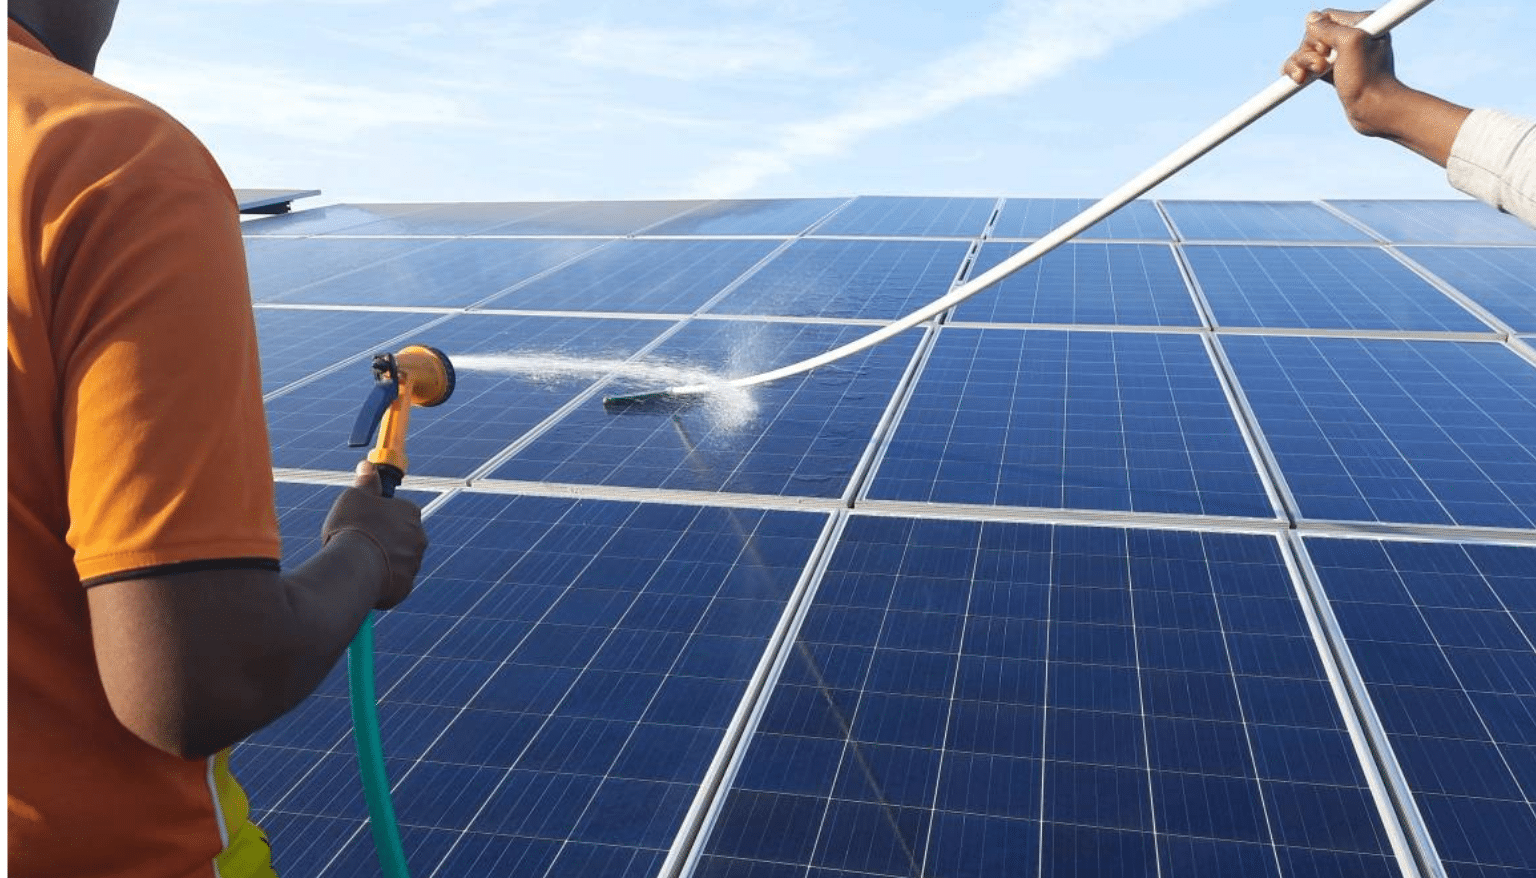 Tools Do You Need for Cleaning Solar Panels